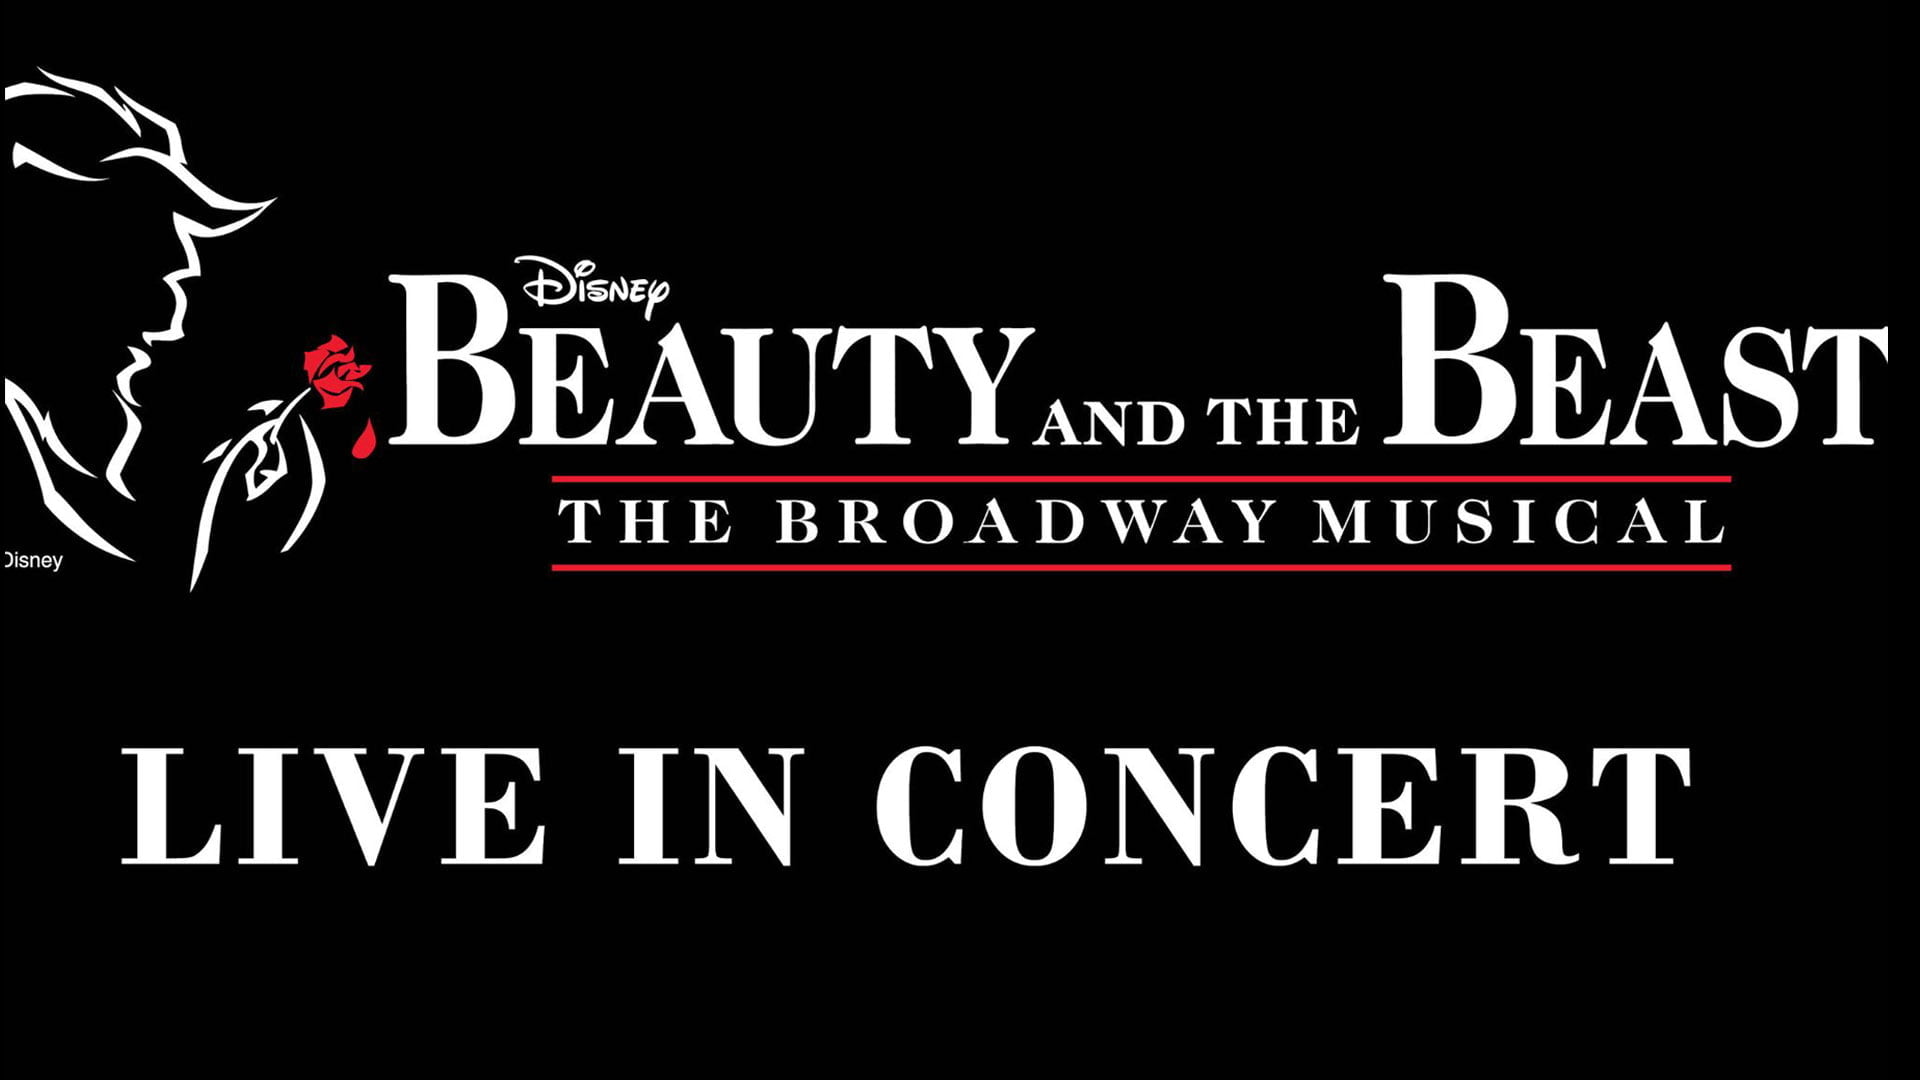 Disney’s Beauty and the Beast: Live in Concert